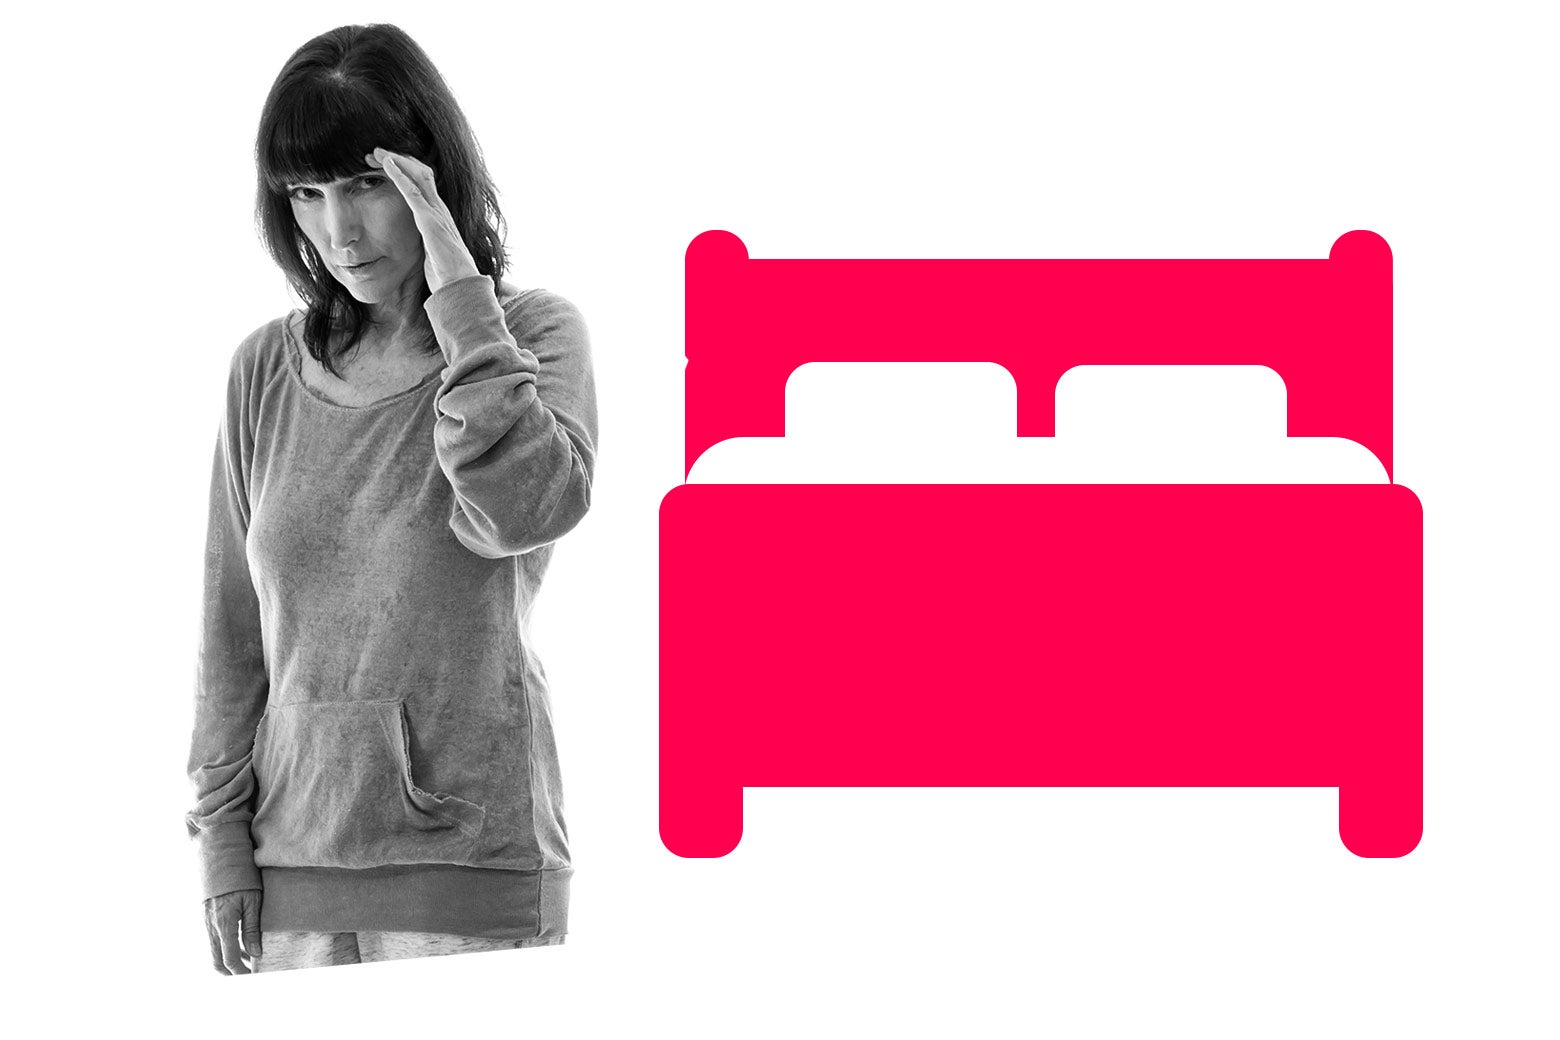 A woman shielding her eyes from a graphic illustration of a bed.